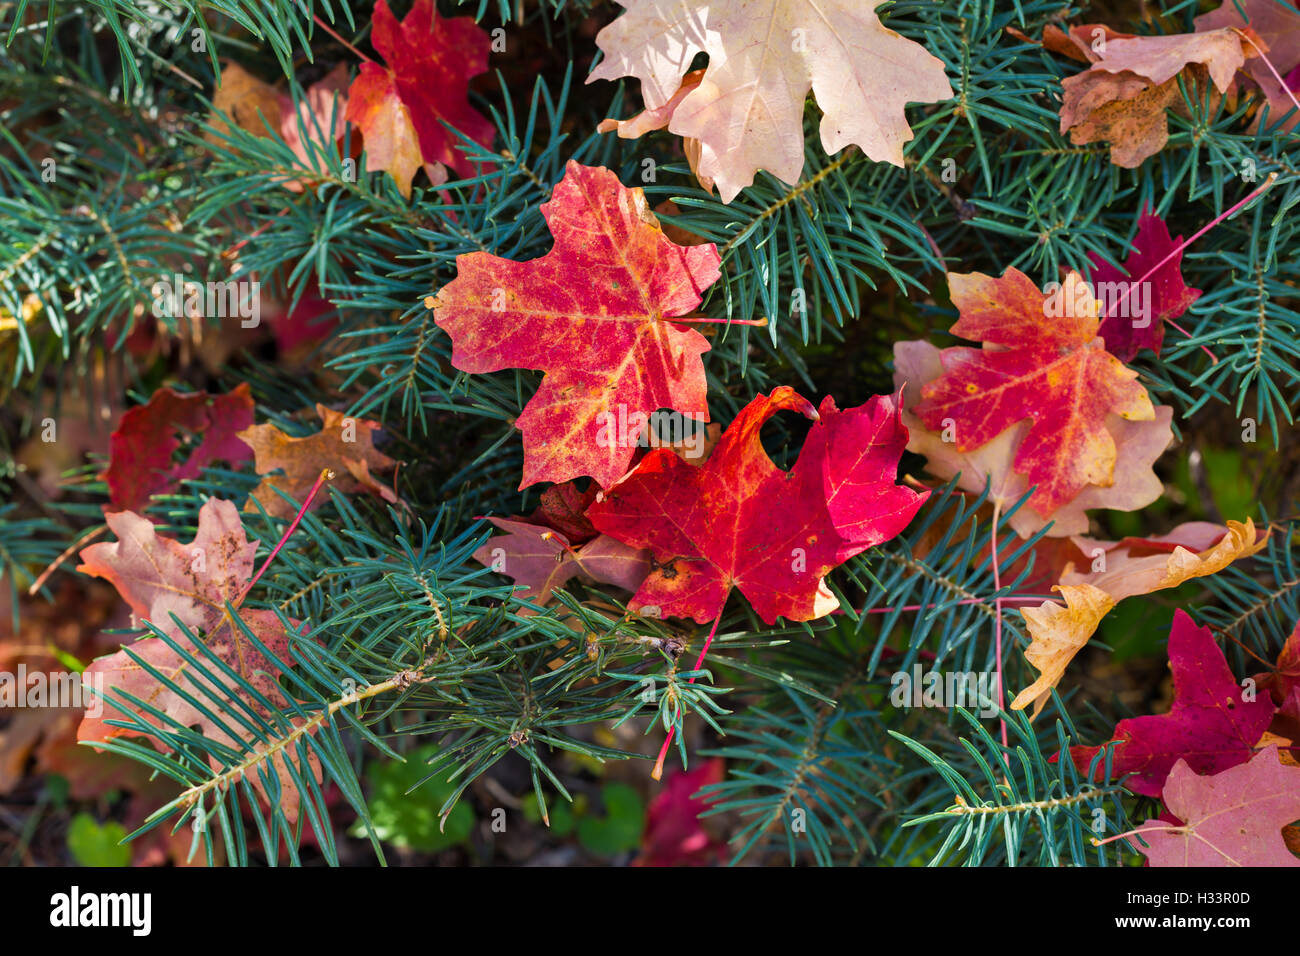 Colorful red autumn Maple leaves on a pine tree branch Stock Photo